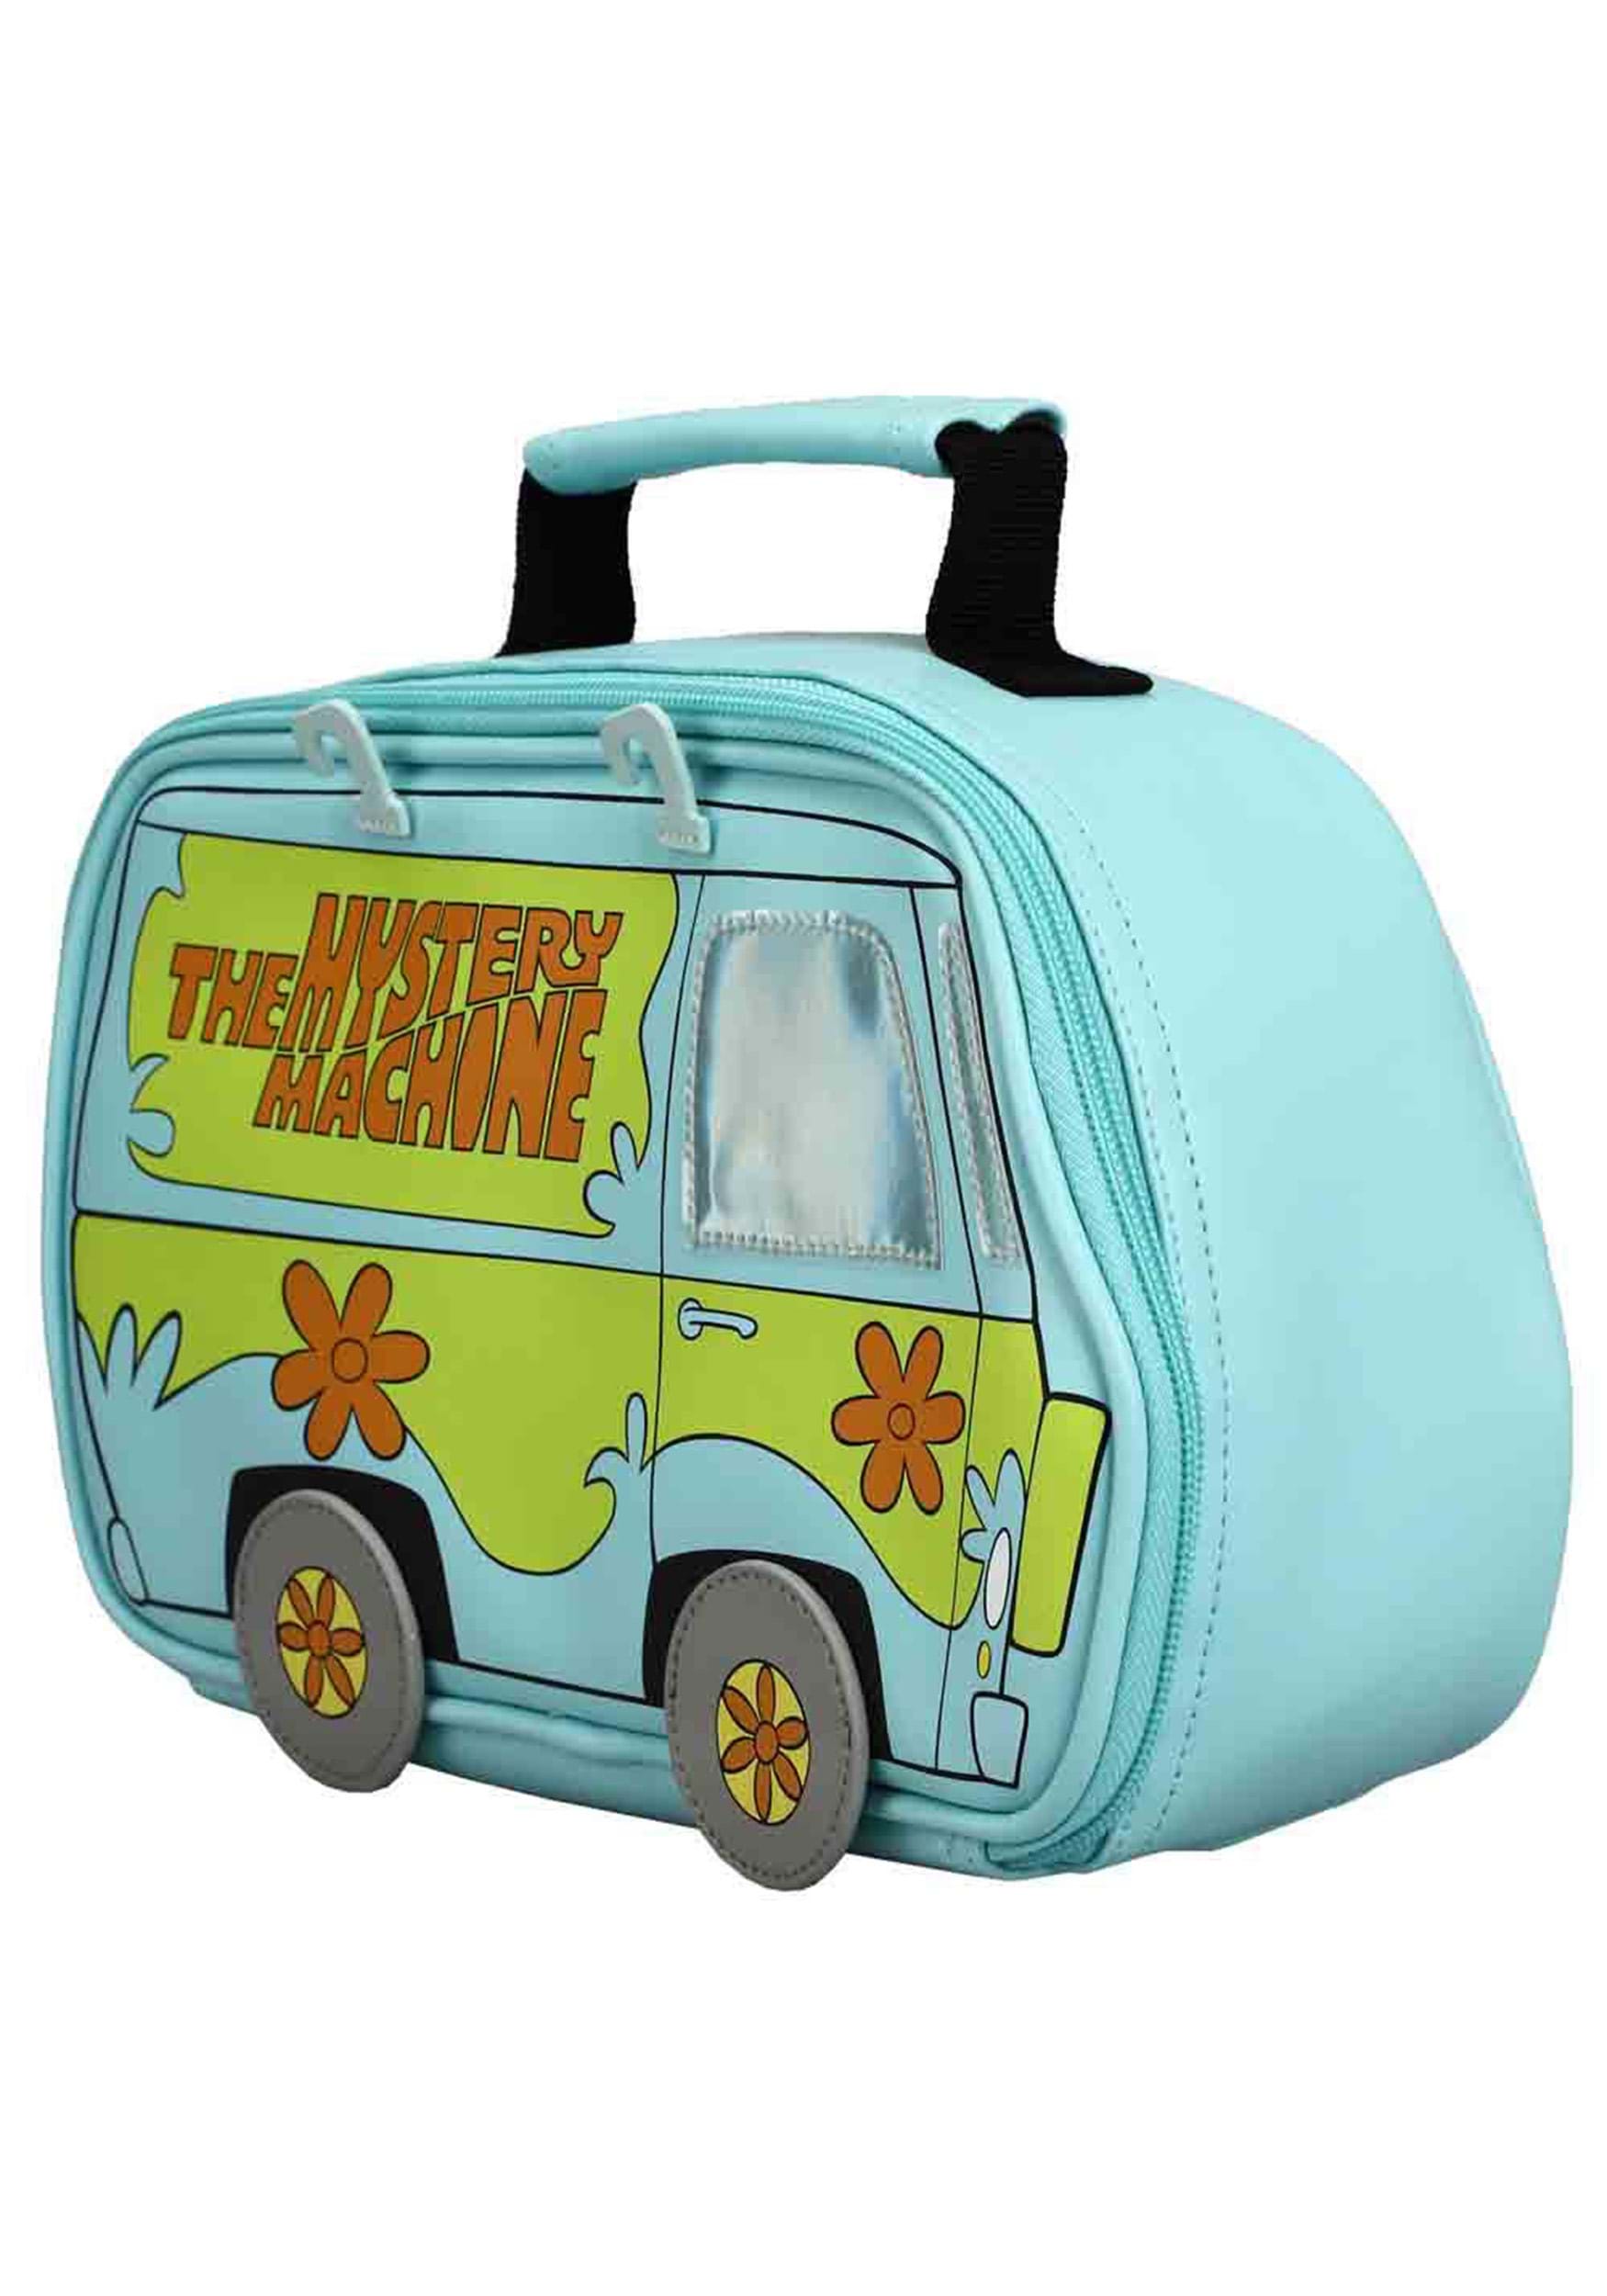 https://images.fun.com/products/77784/2-1-193995/scooby-doo-mystery-machine-die-cut-insulated-lunch-tote-alt-.jpg